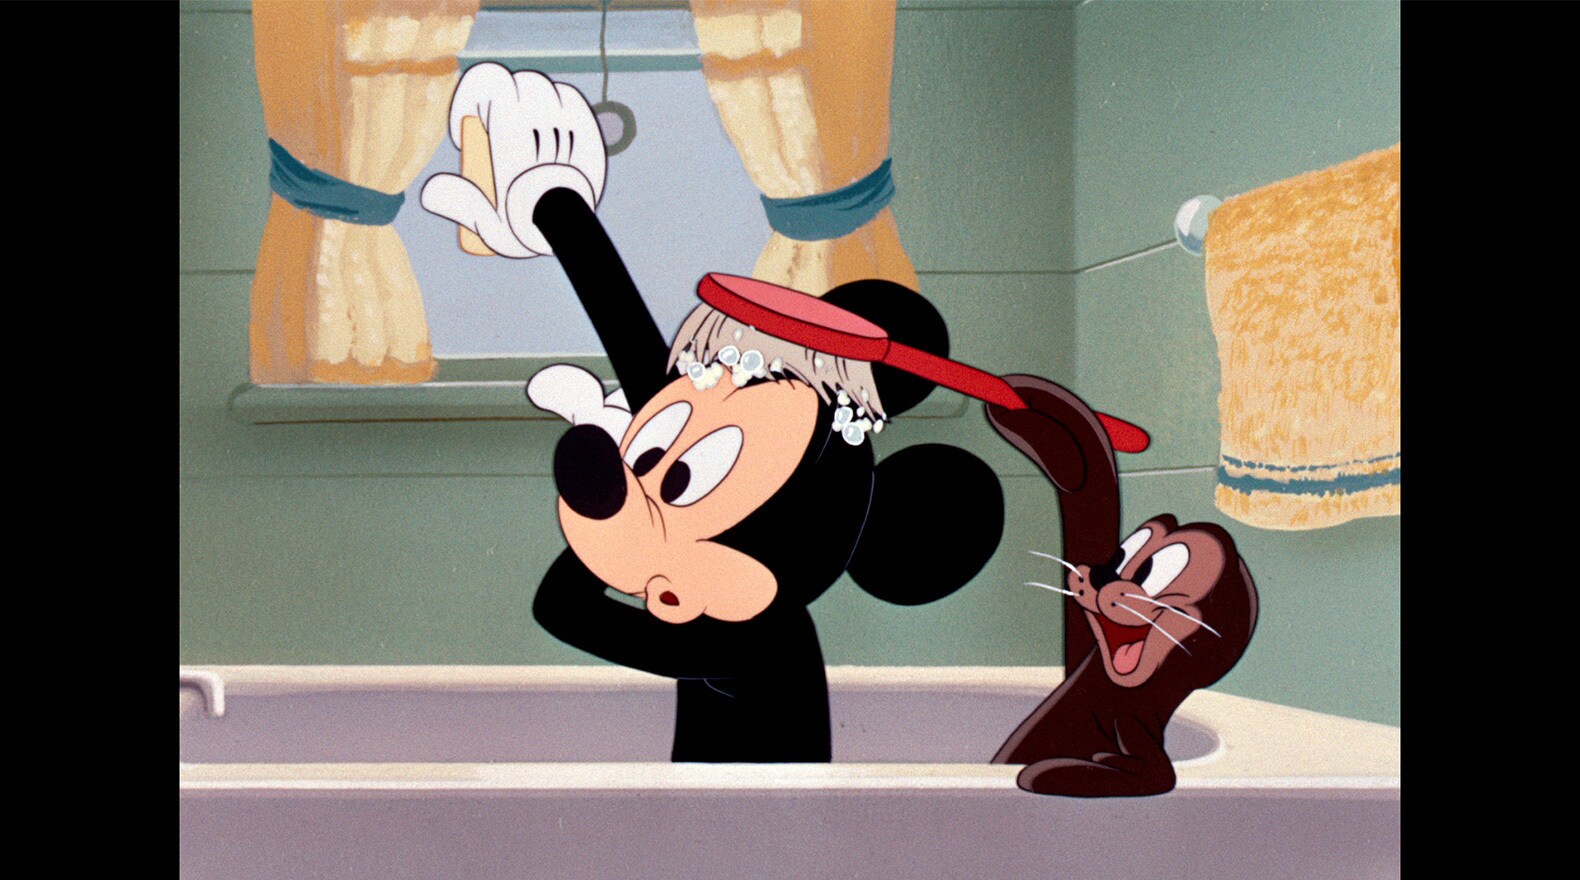 Mickey goes about his day, while accompanied by a seal that escaped from the zoo.